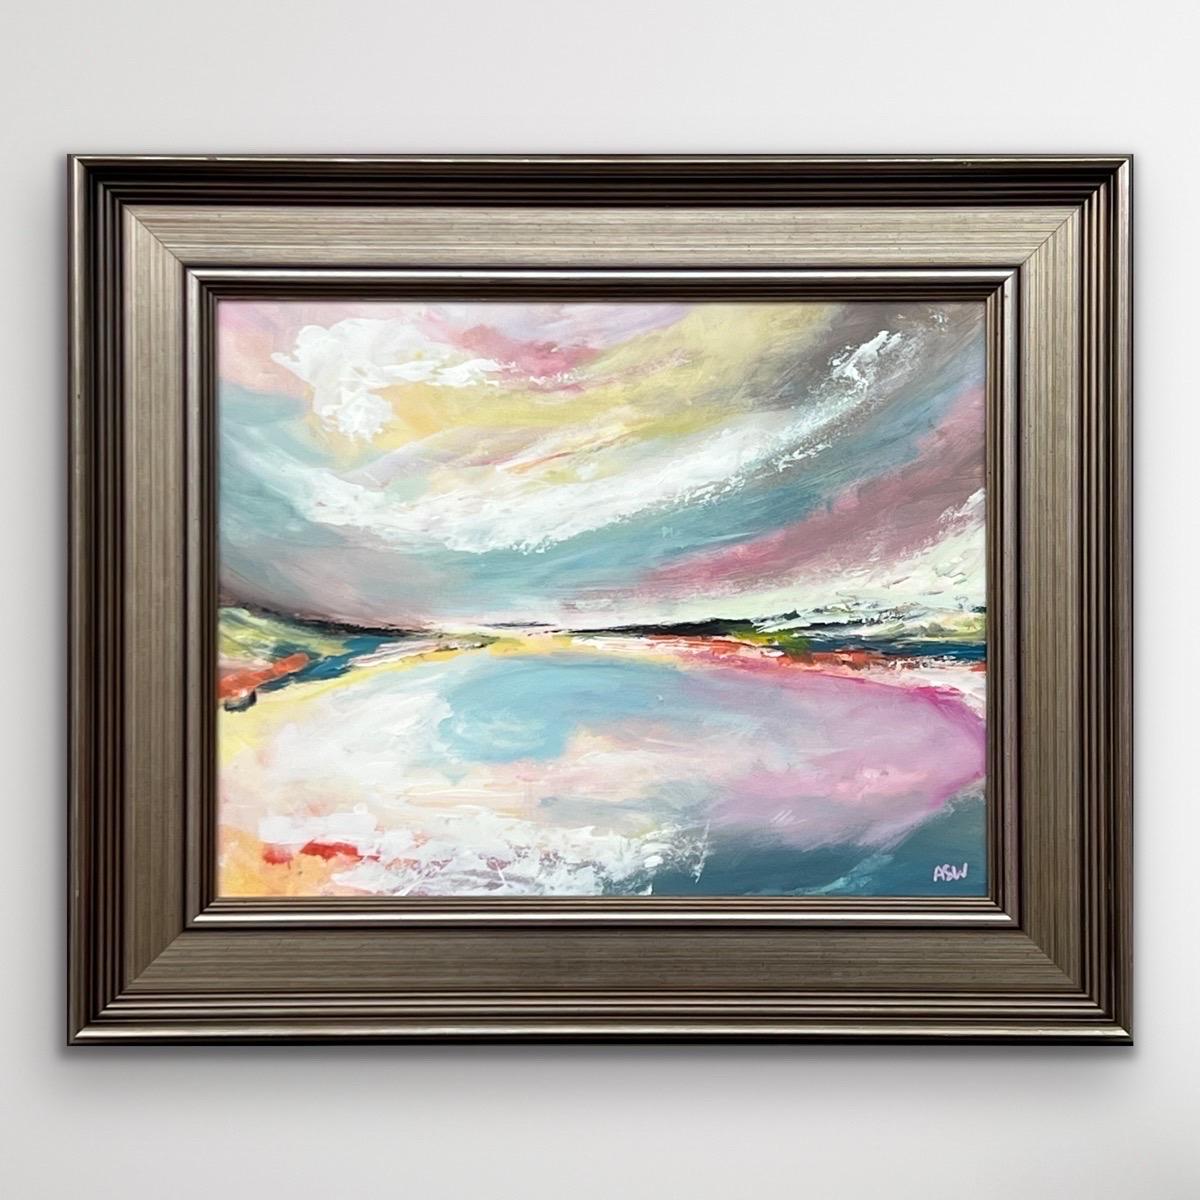 Abstract Landscape Seascape Art with Pink Blue & White Sky by British Artist - Painting by Angela Wakefield